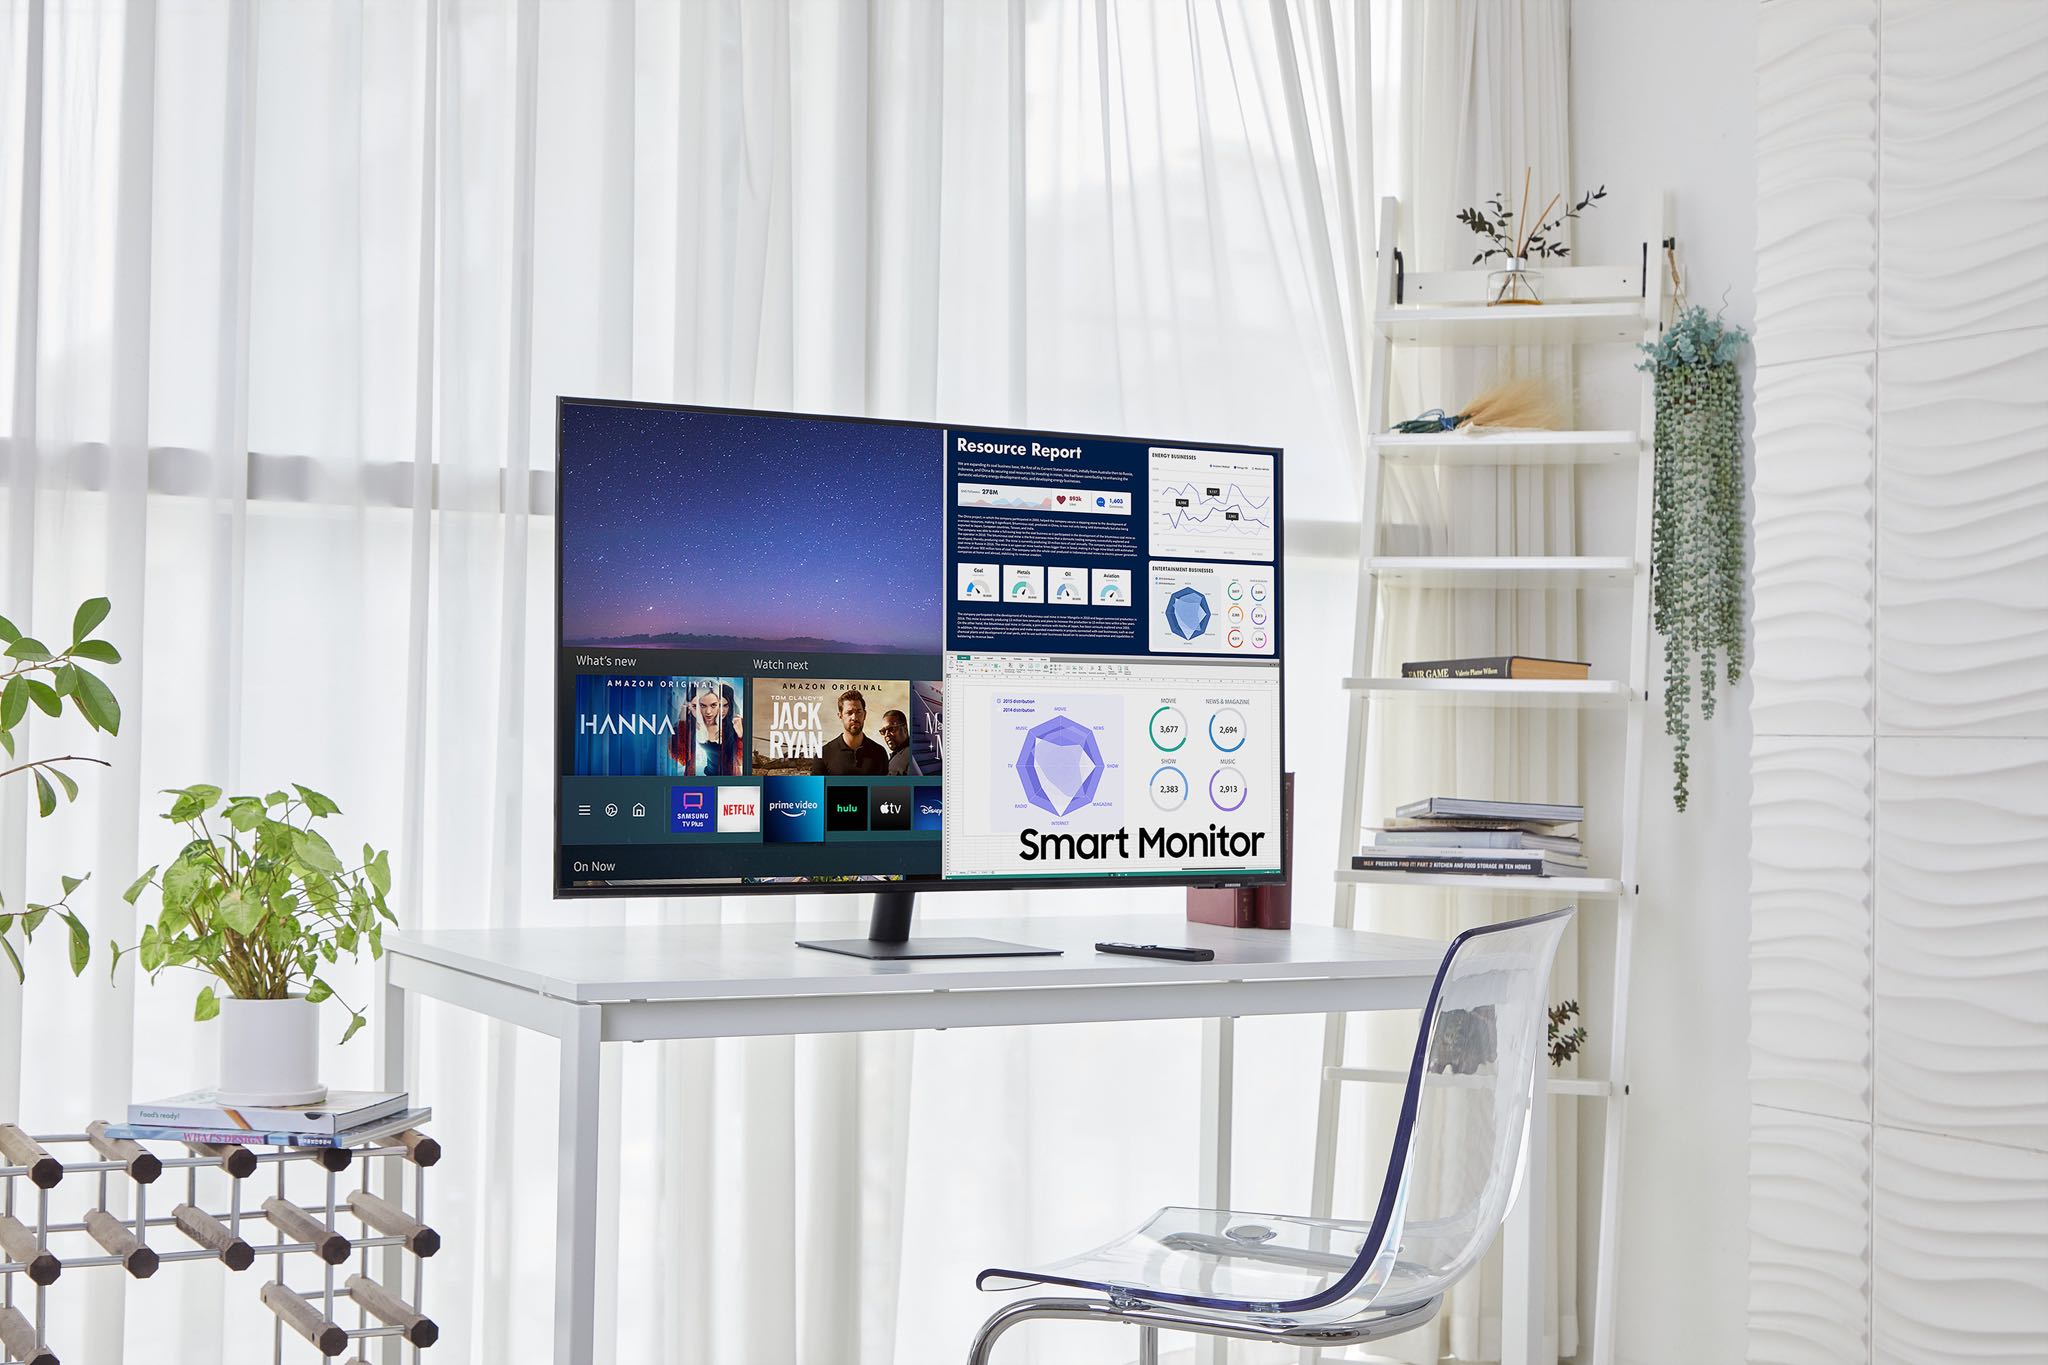 Samsung's promotional photograph depicting the new 43-inch M7 Smart Monitor on a desk